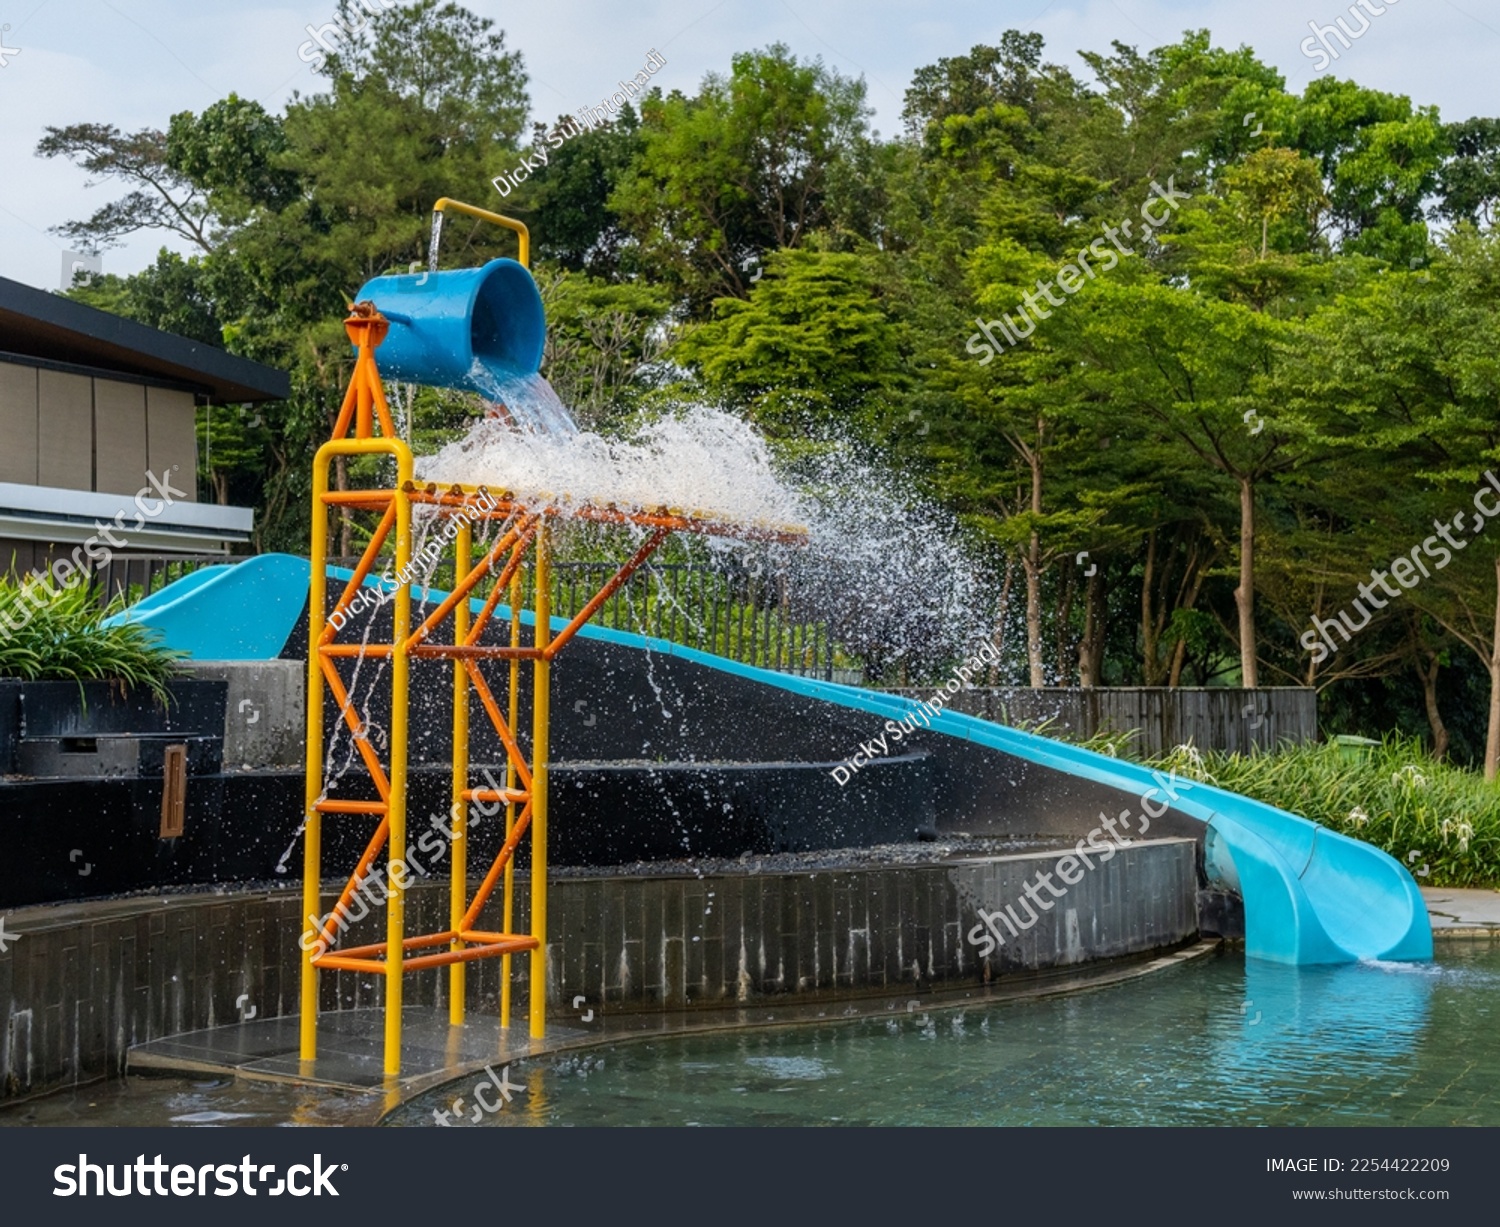 A blue water slide next to a water pouring large blue bucket on top of a colorful metal scaffolding at the side of a children pool. #2254422209